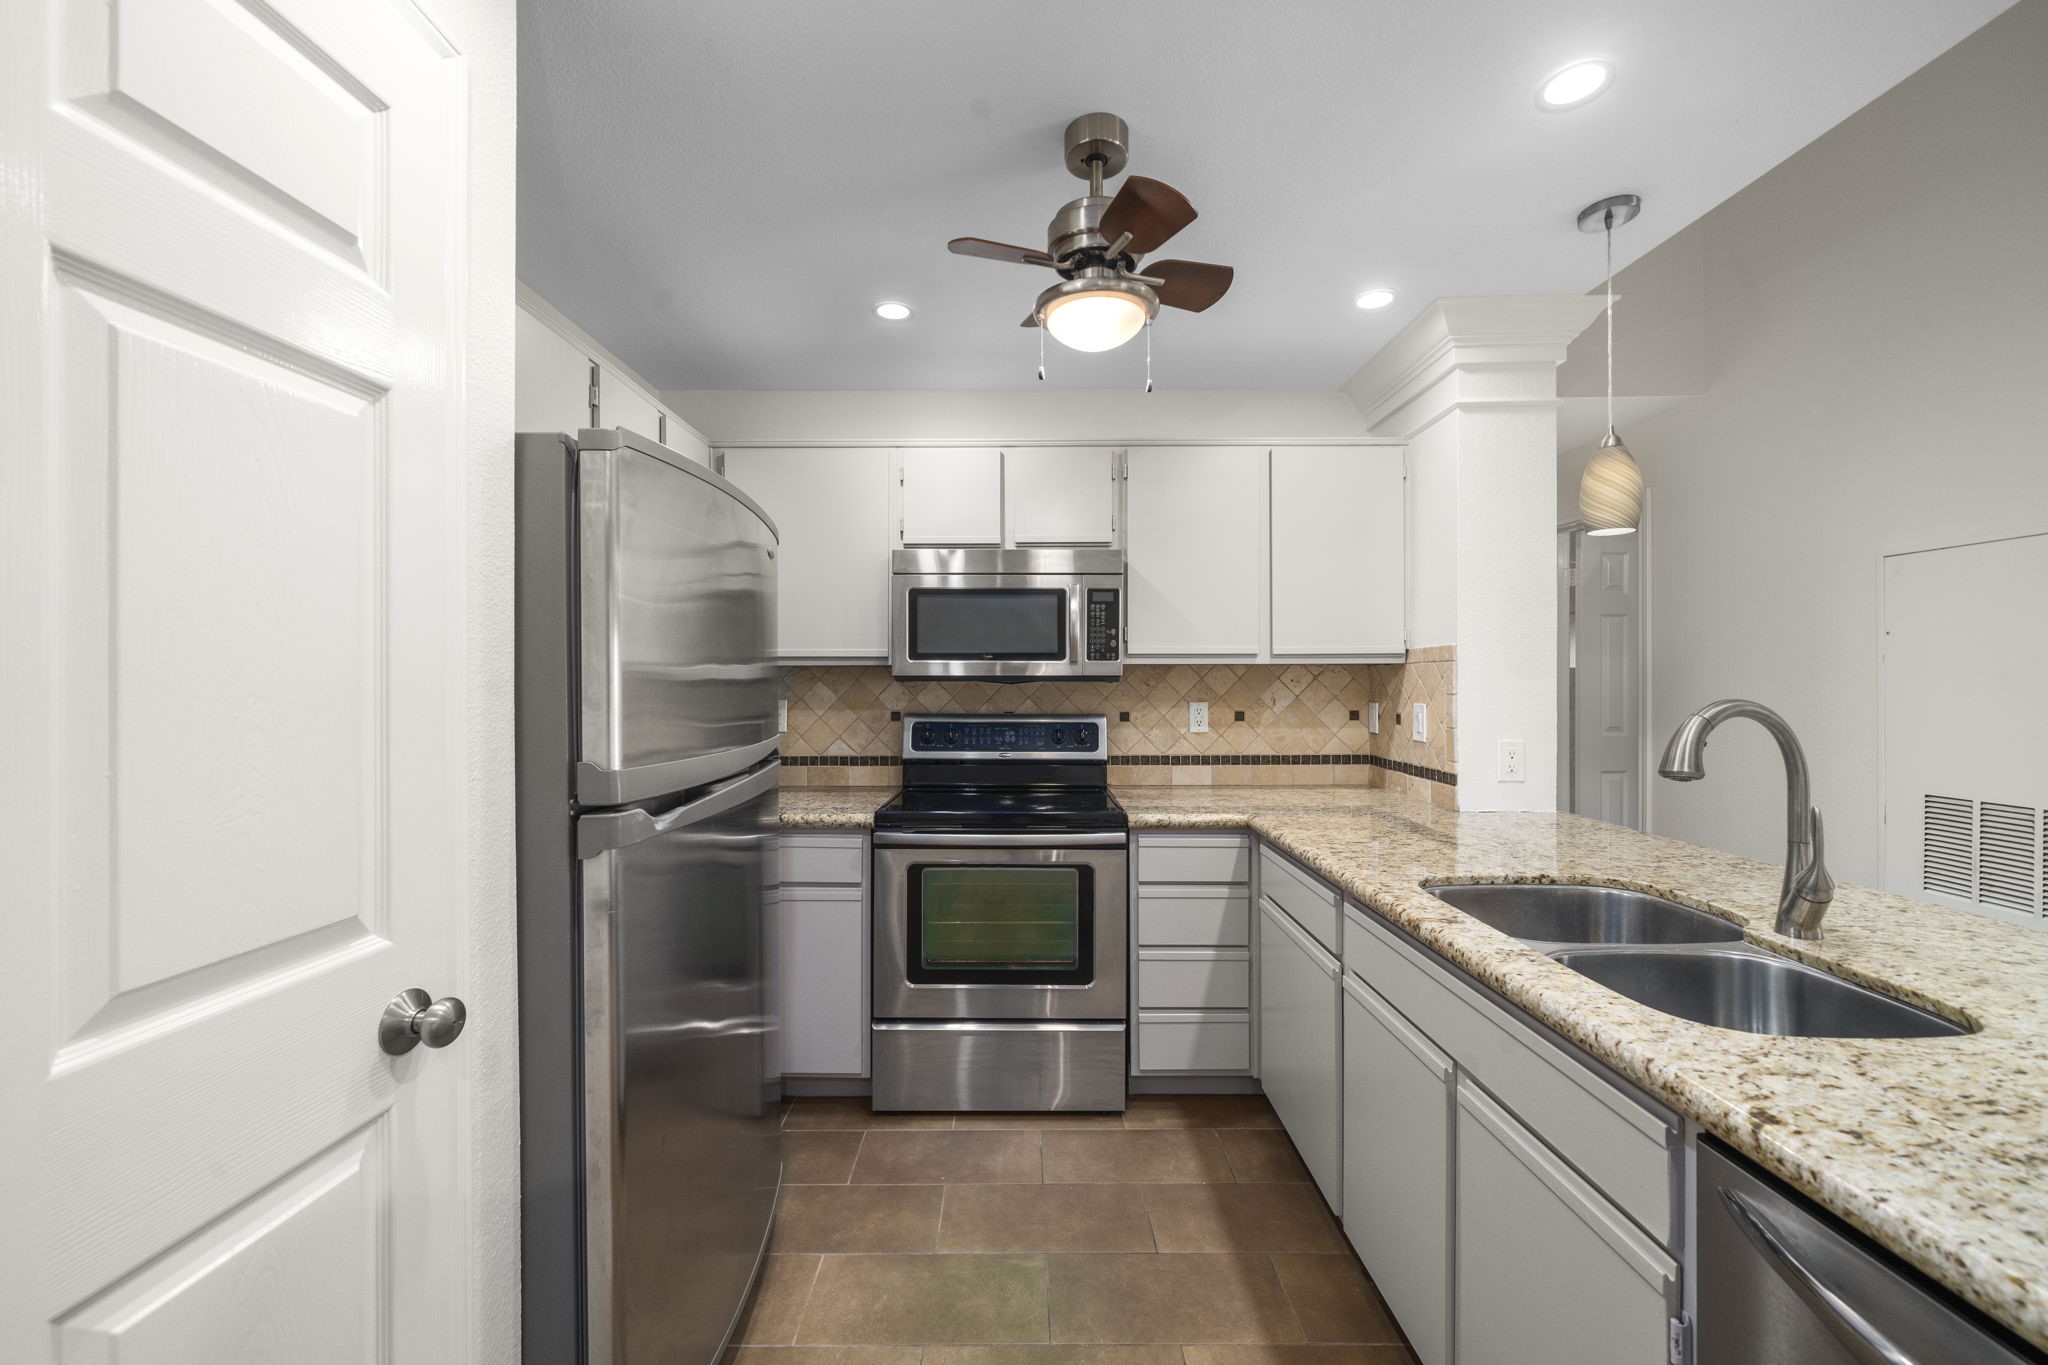 The stainless steel appliances perfectly complement the white cabinetry and warm beige marble, resulting in a harmonious and stunning visual blend.